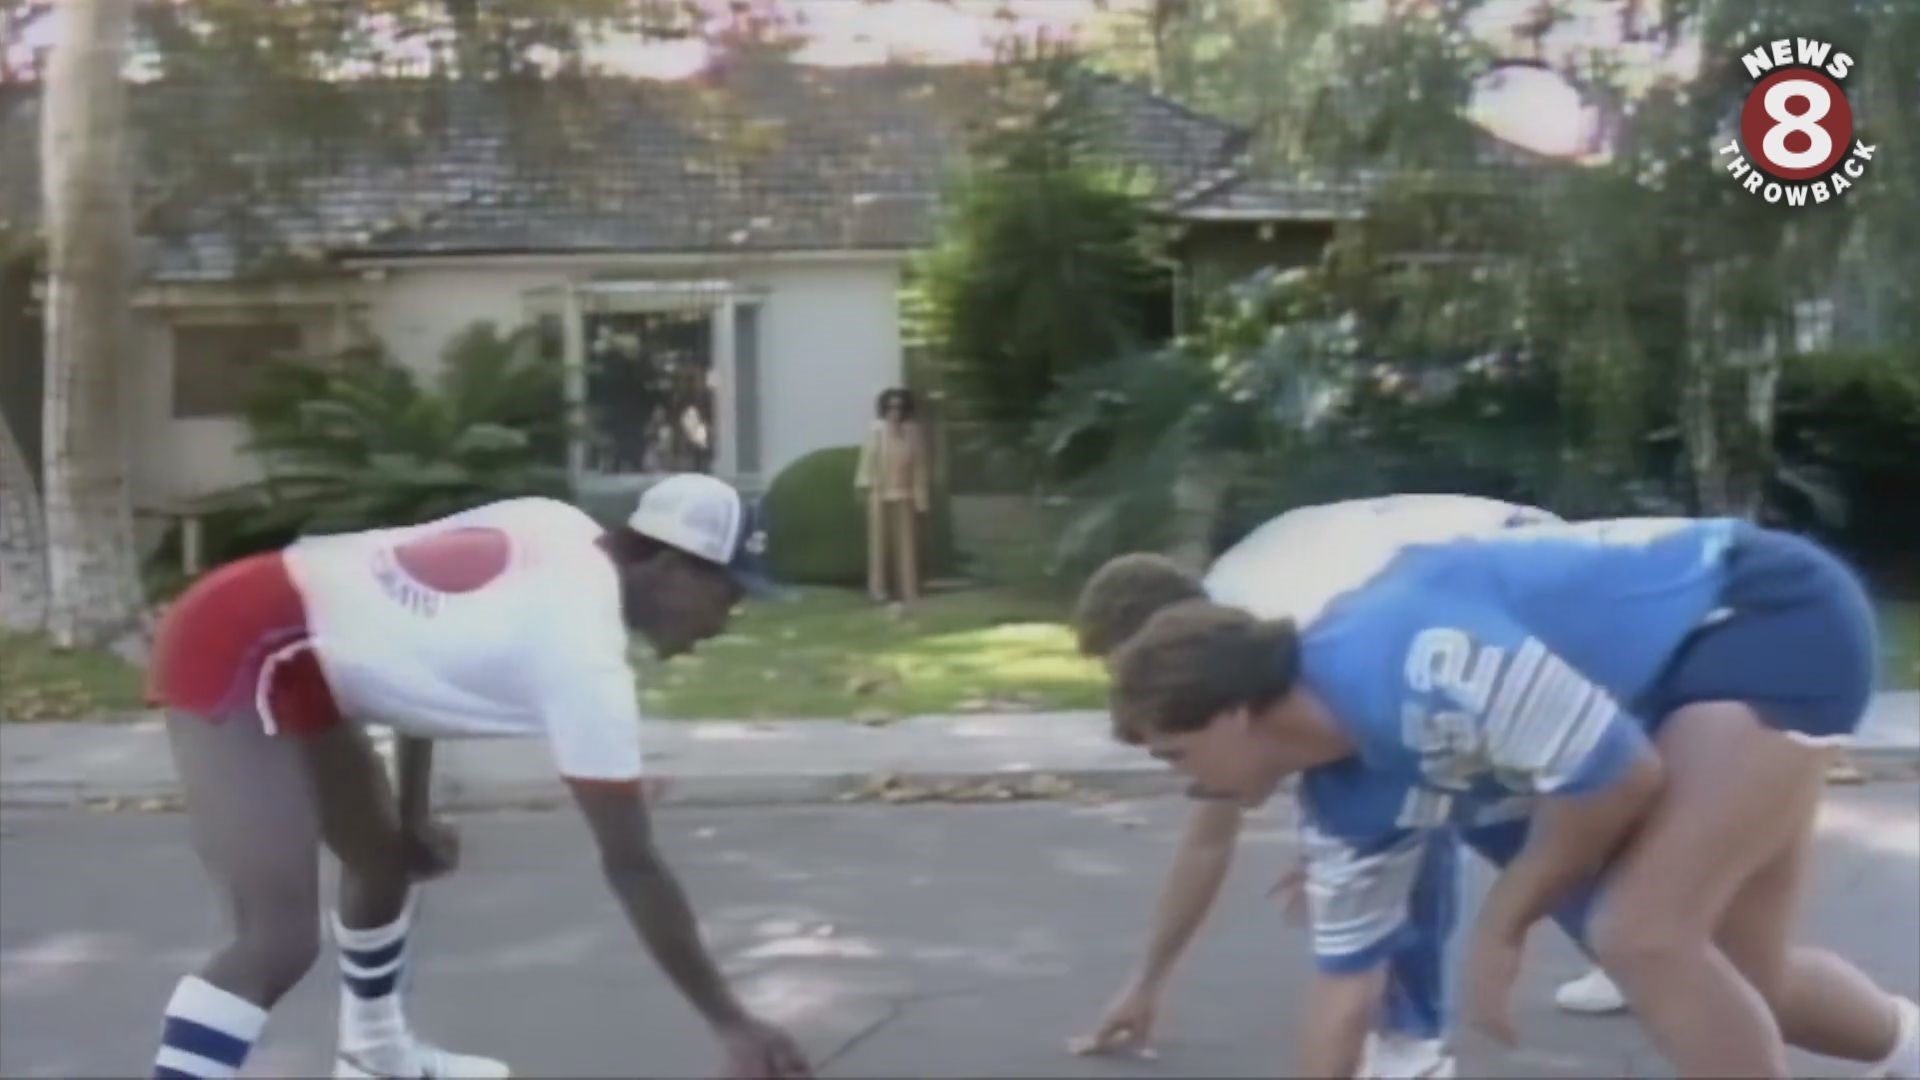 San Diego Chargers play football in the street in front of Larry Himmel's Talmadge home. 1980 something.